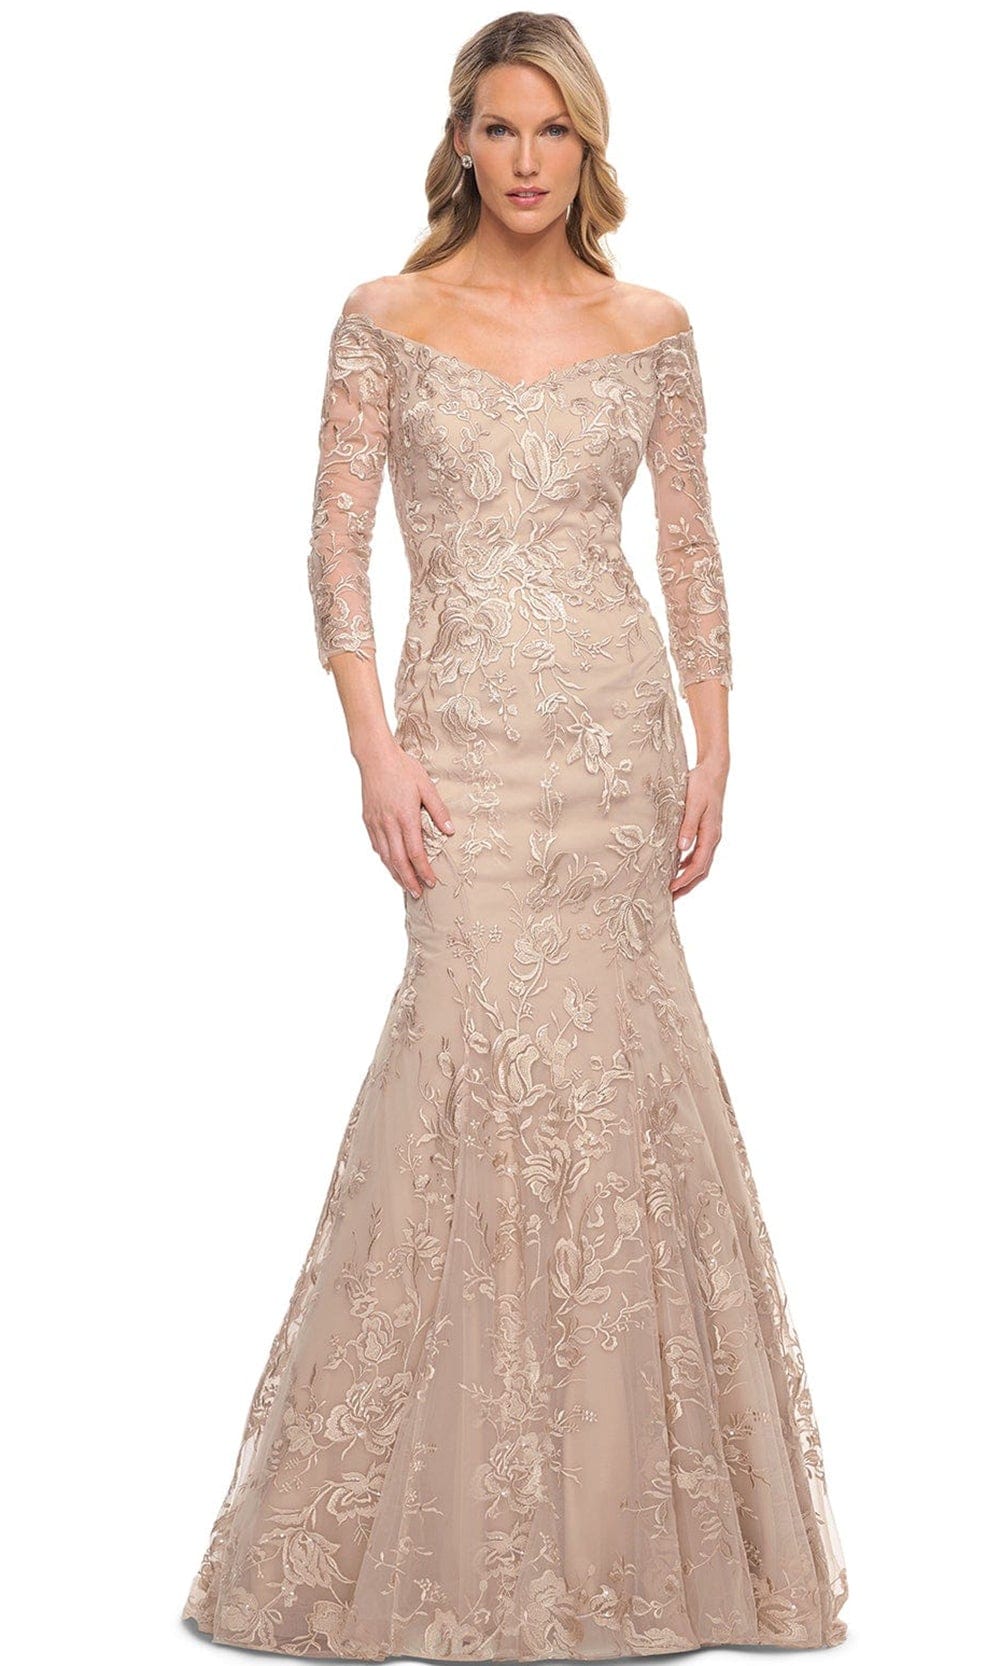 Image of La Femme 30164 - Embroidered Mermaid Mother of the Bride Dress